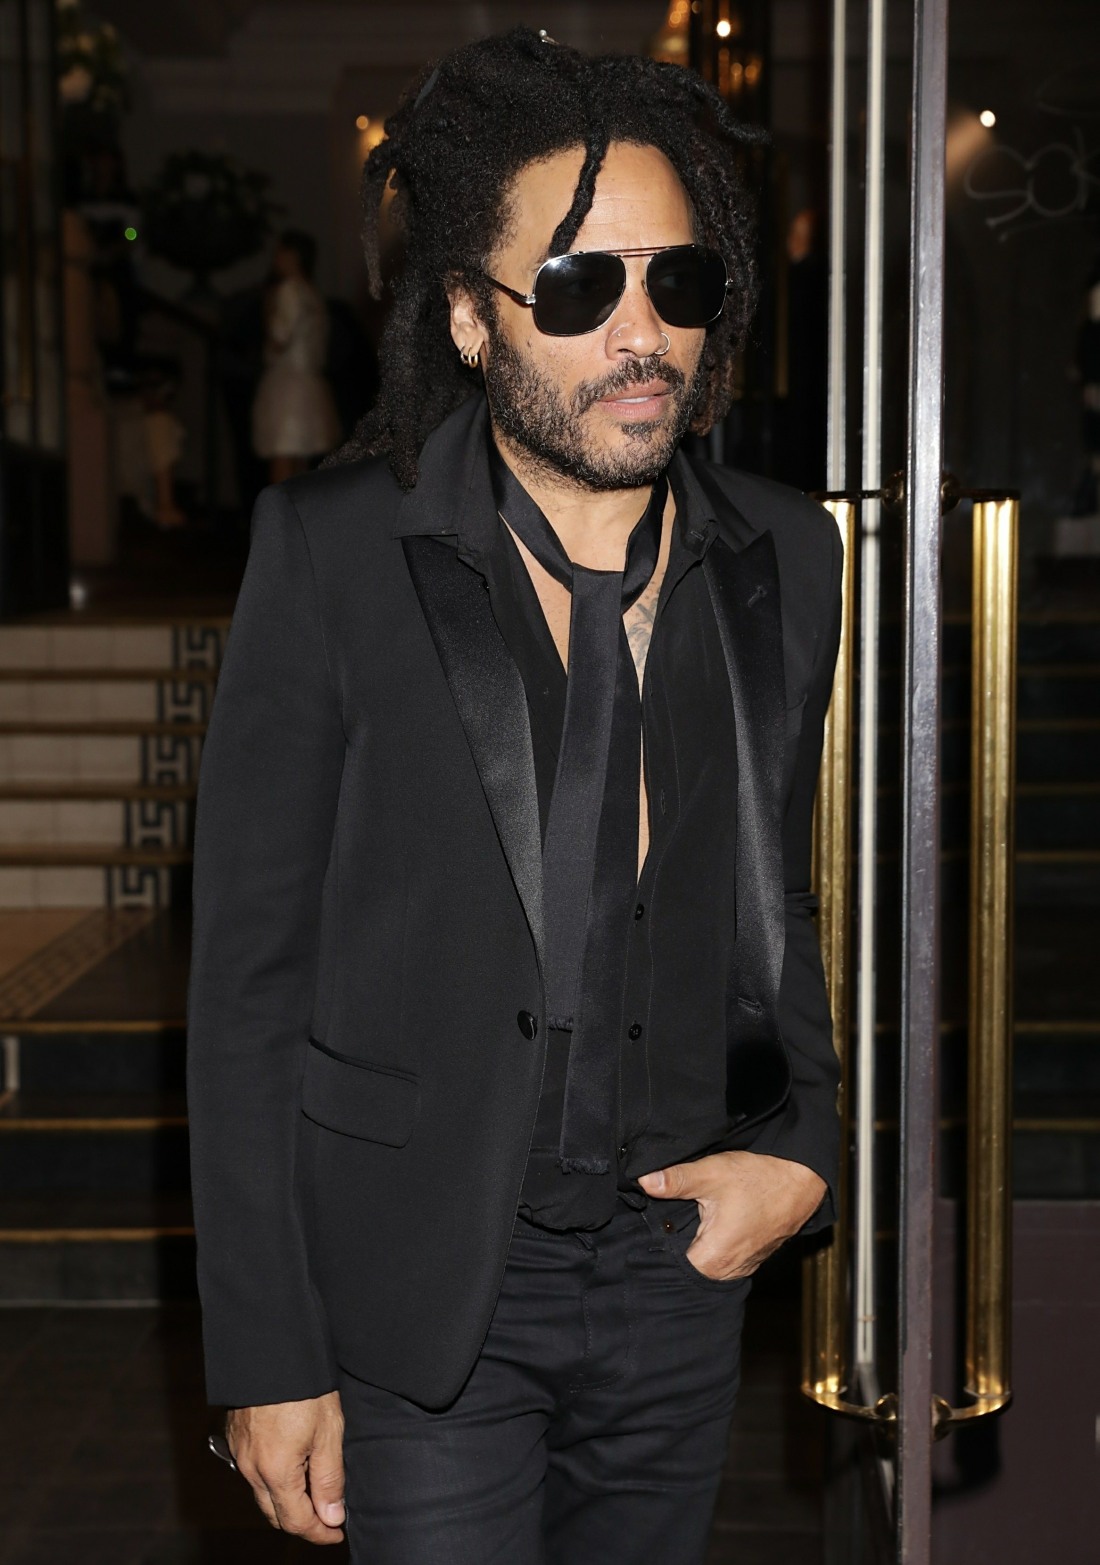 Lenny Kravitz seen leaving Vogue party during Haute Couture Week 2020 in Paris